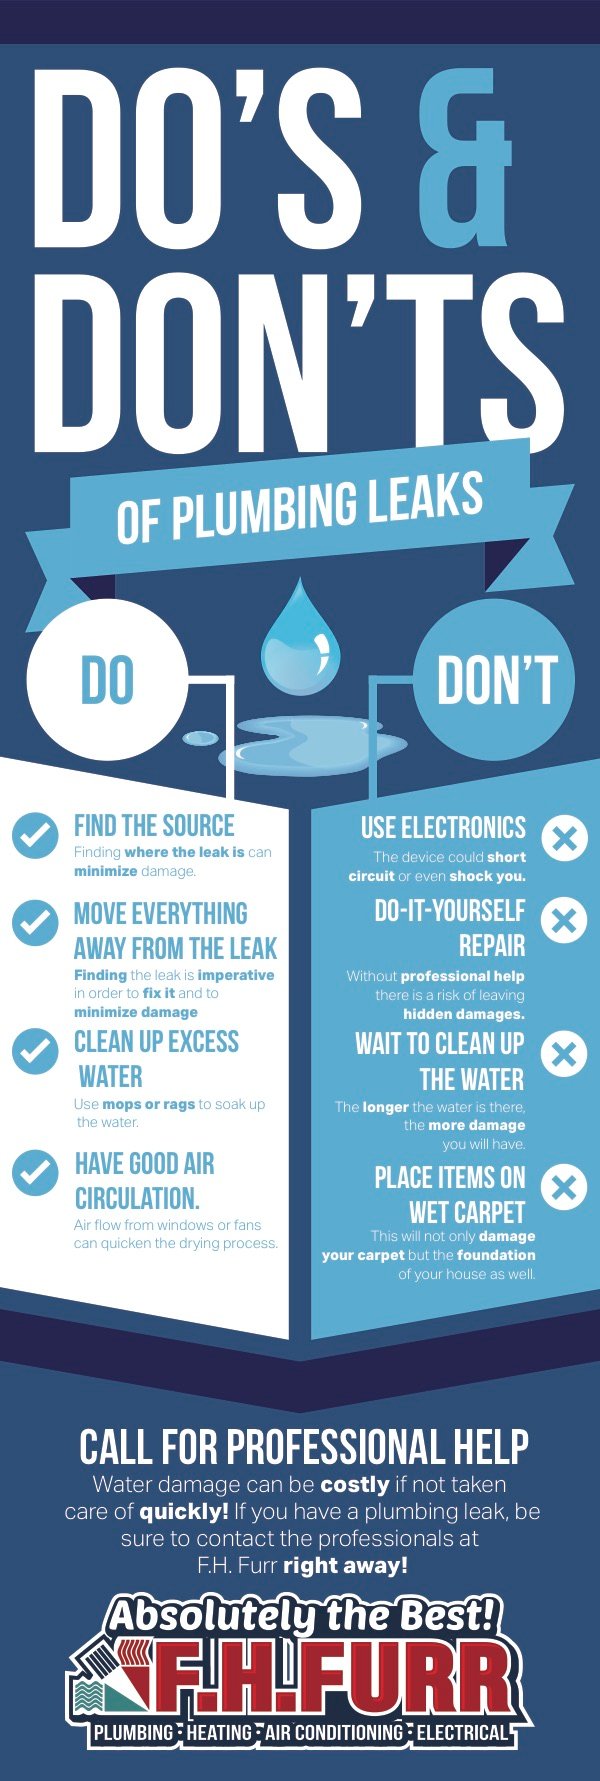 An infographic that describes what to do and not to do when dealing with a plumbing leak. It reads, "Do's: find the source, clear area of items that could be damaged, clean up access water, and have good air circulation. Don't: use electronics in the area, attempt a DIY repair, wait to clean up water, or place items on wet carpet."